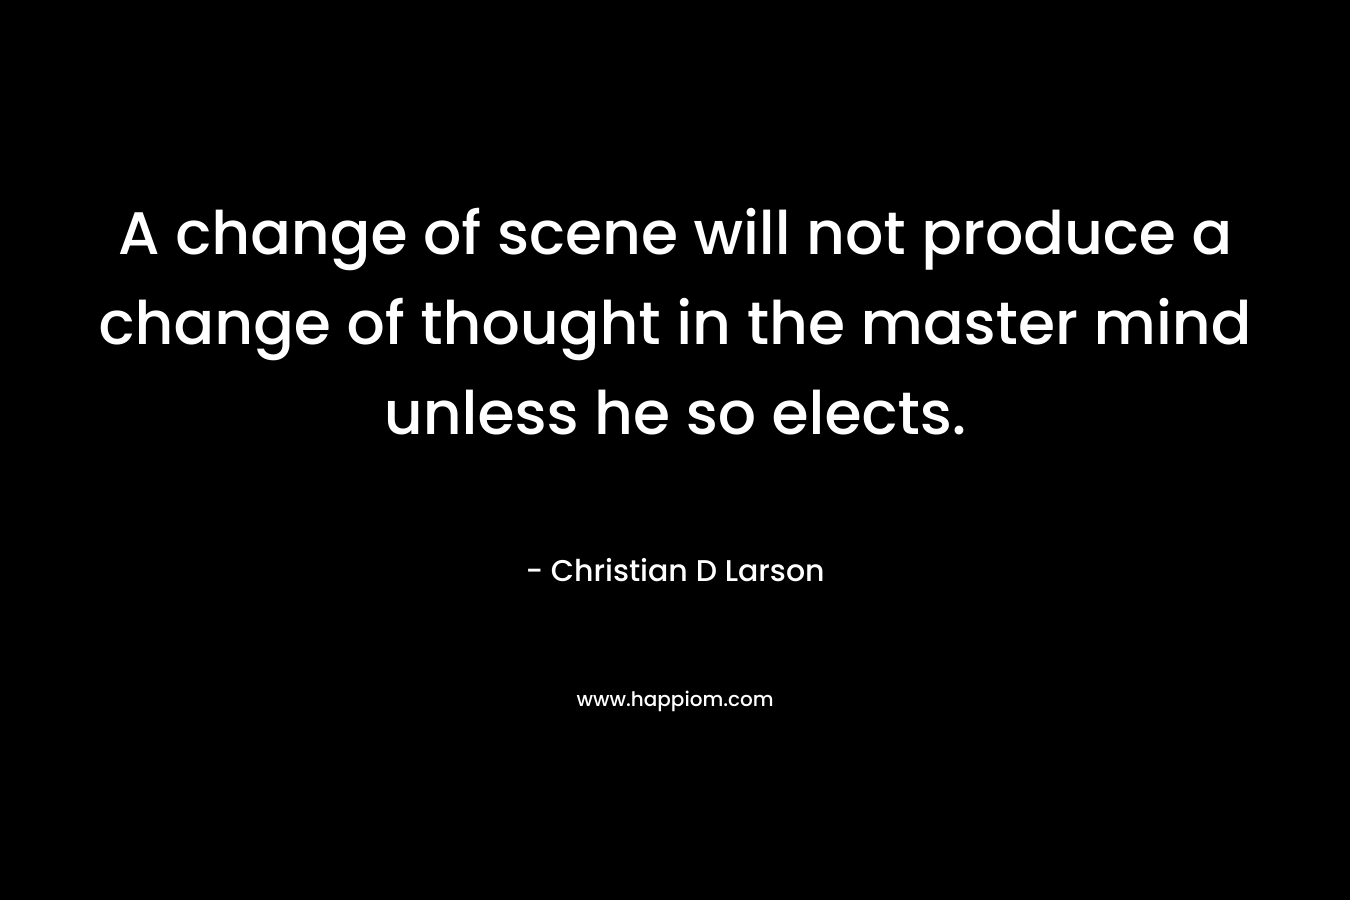 A change of scene will not produce a change of thought in the master mind unless he so elects.